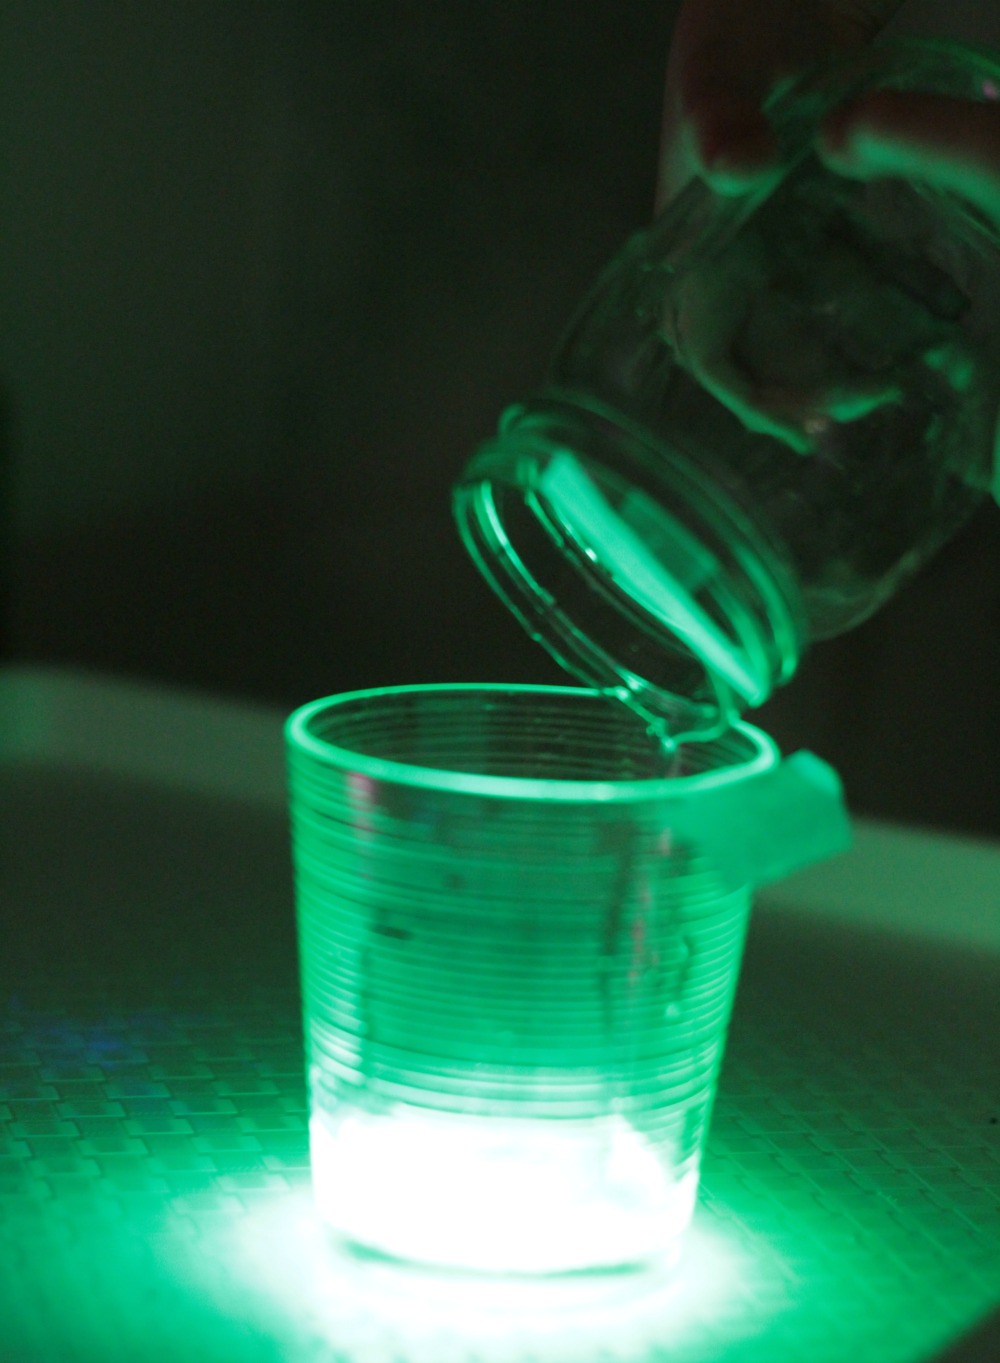 Kids can learn about the chemical properties of glow sticks and how they create glowing light in the glow stick science lab.